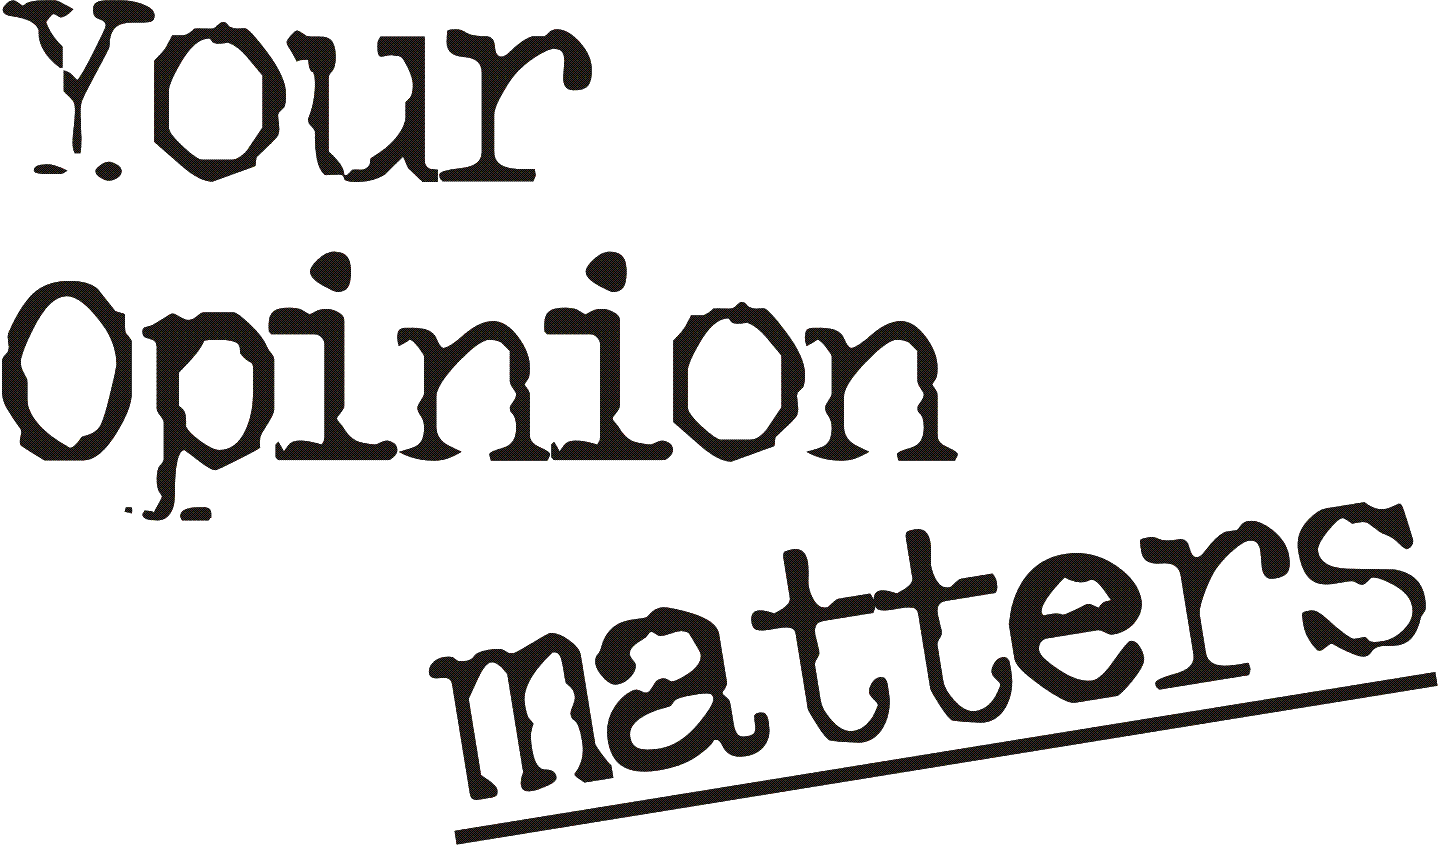 Because in my opinion. Opinion. Opinion картинка. Your opinion. Your opinion matters.